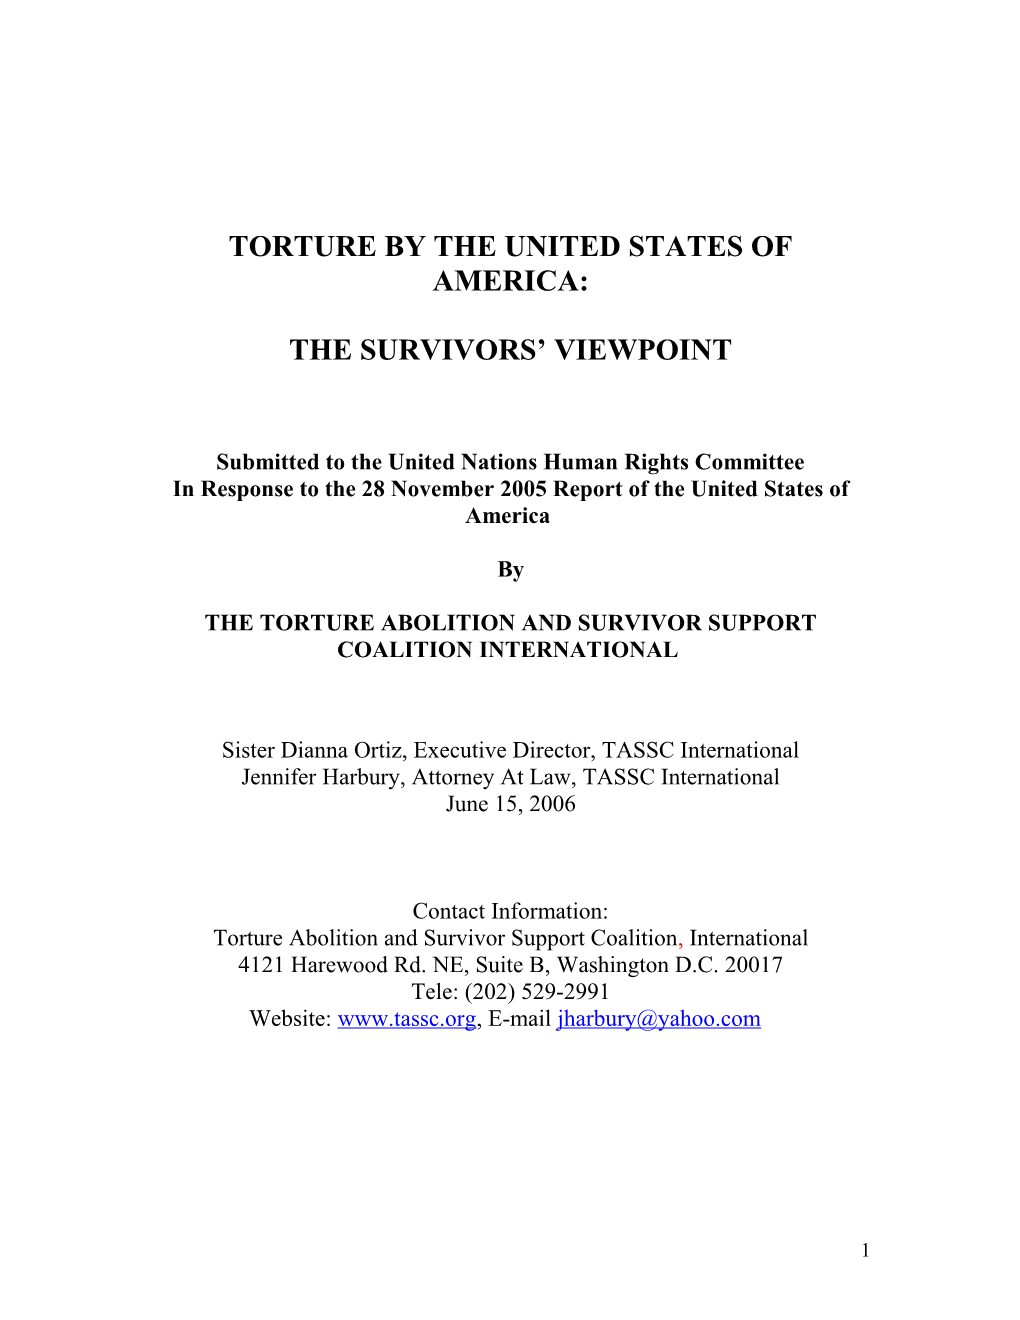 The Practice of Torture and Cruel, Inhuman and Degrading Treatment by the United States